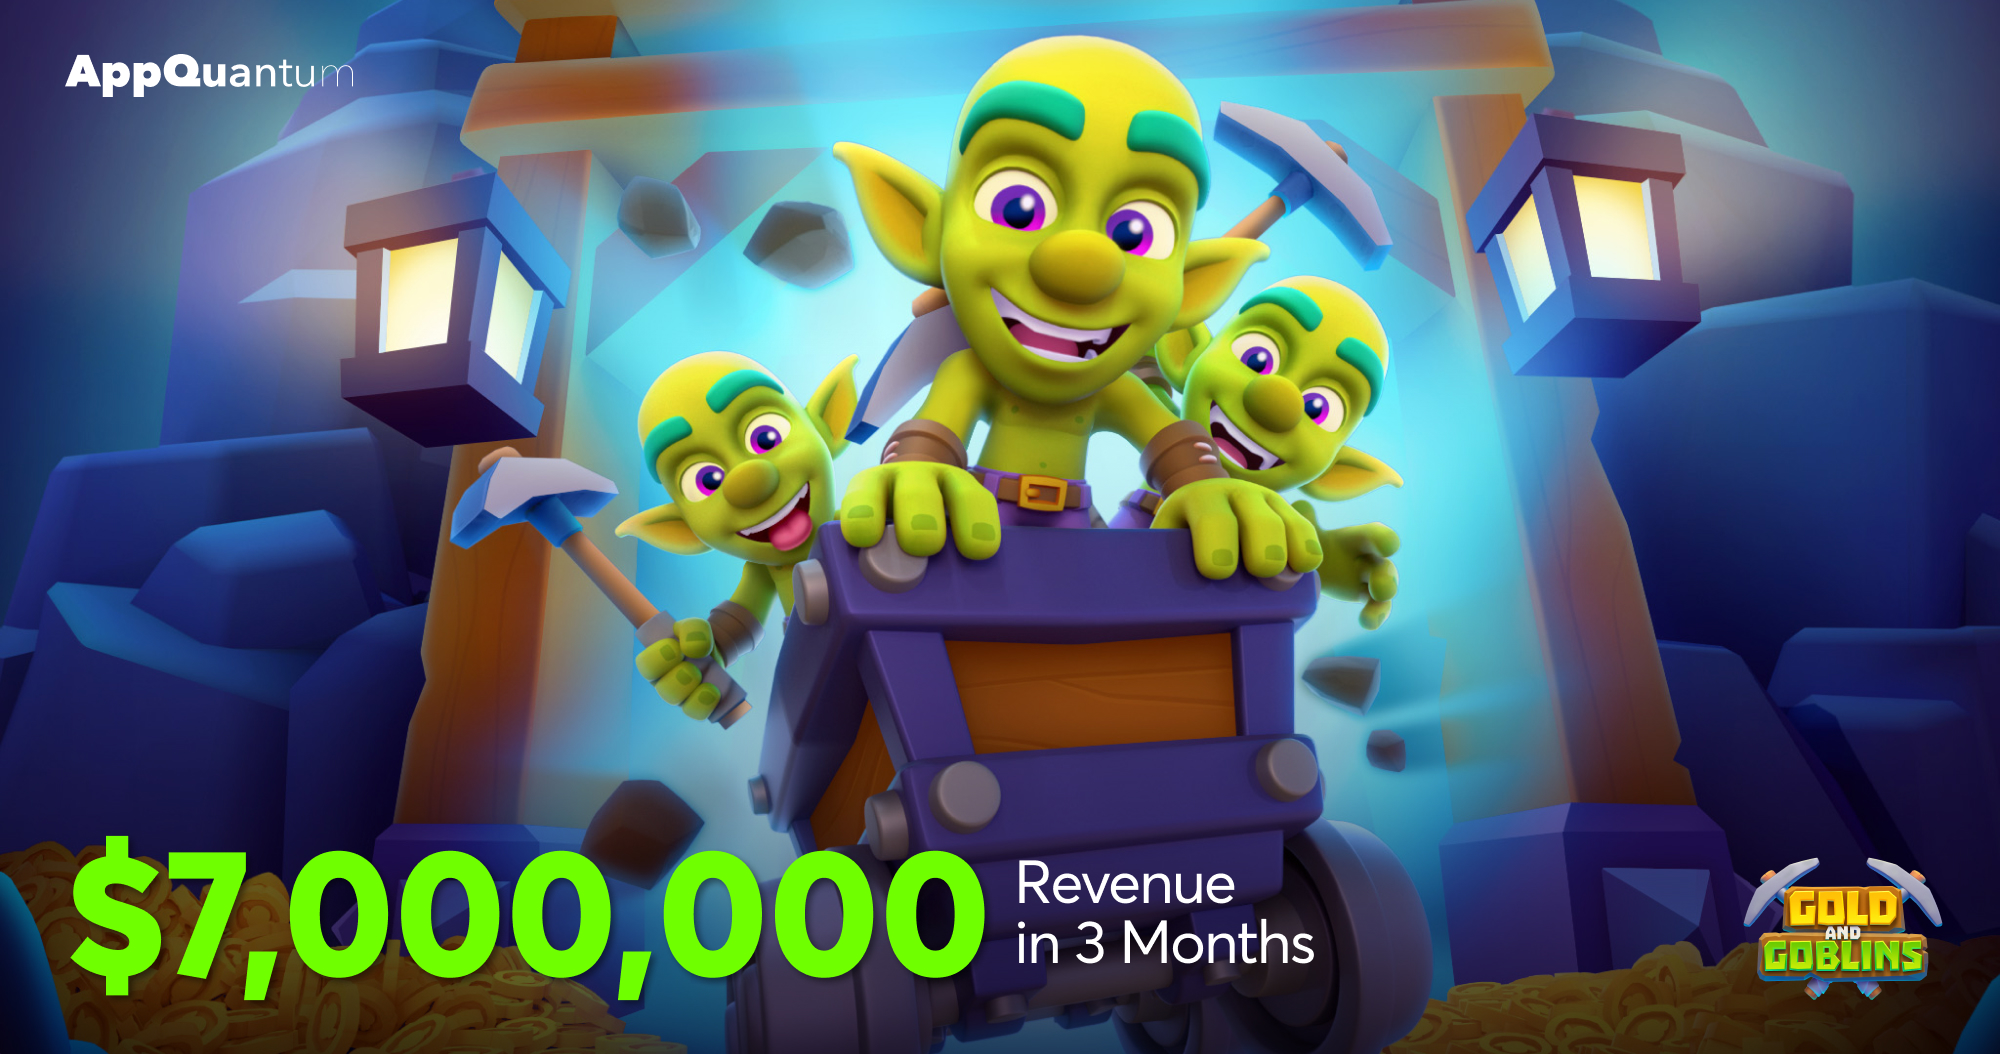 AppQuantum Has Earned $7,000,000 for Gold & Goblins in 3 Months